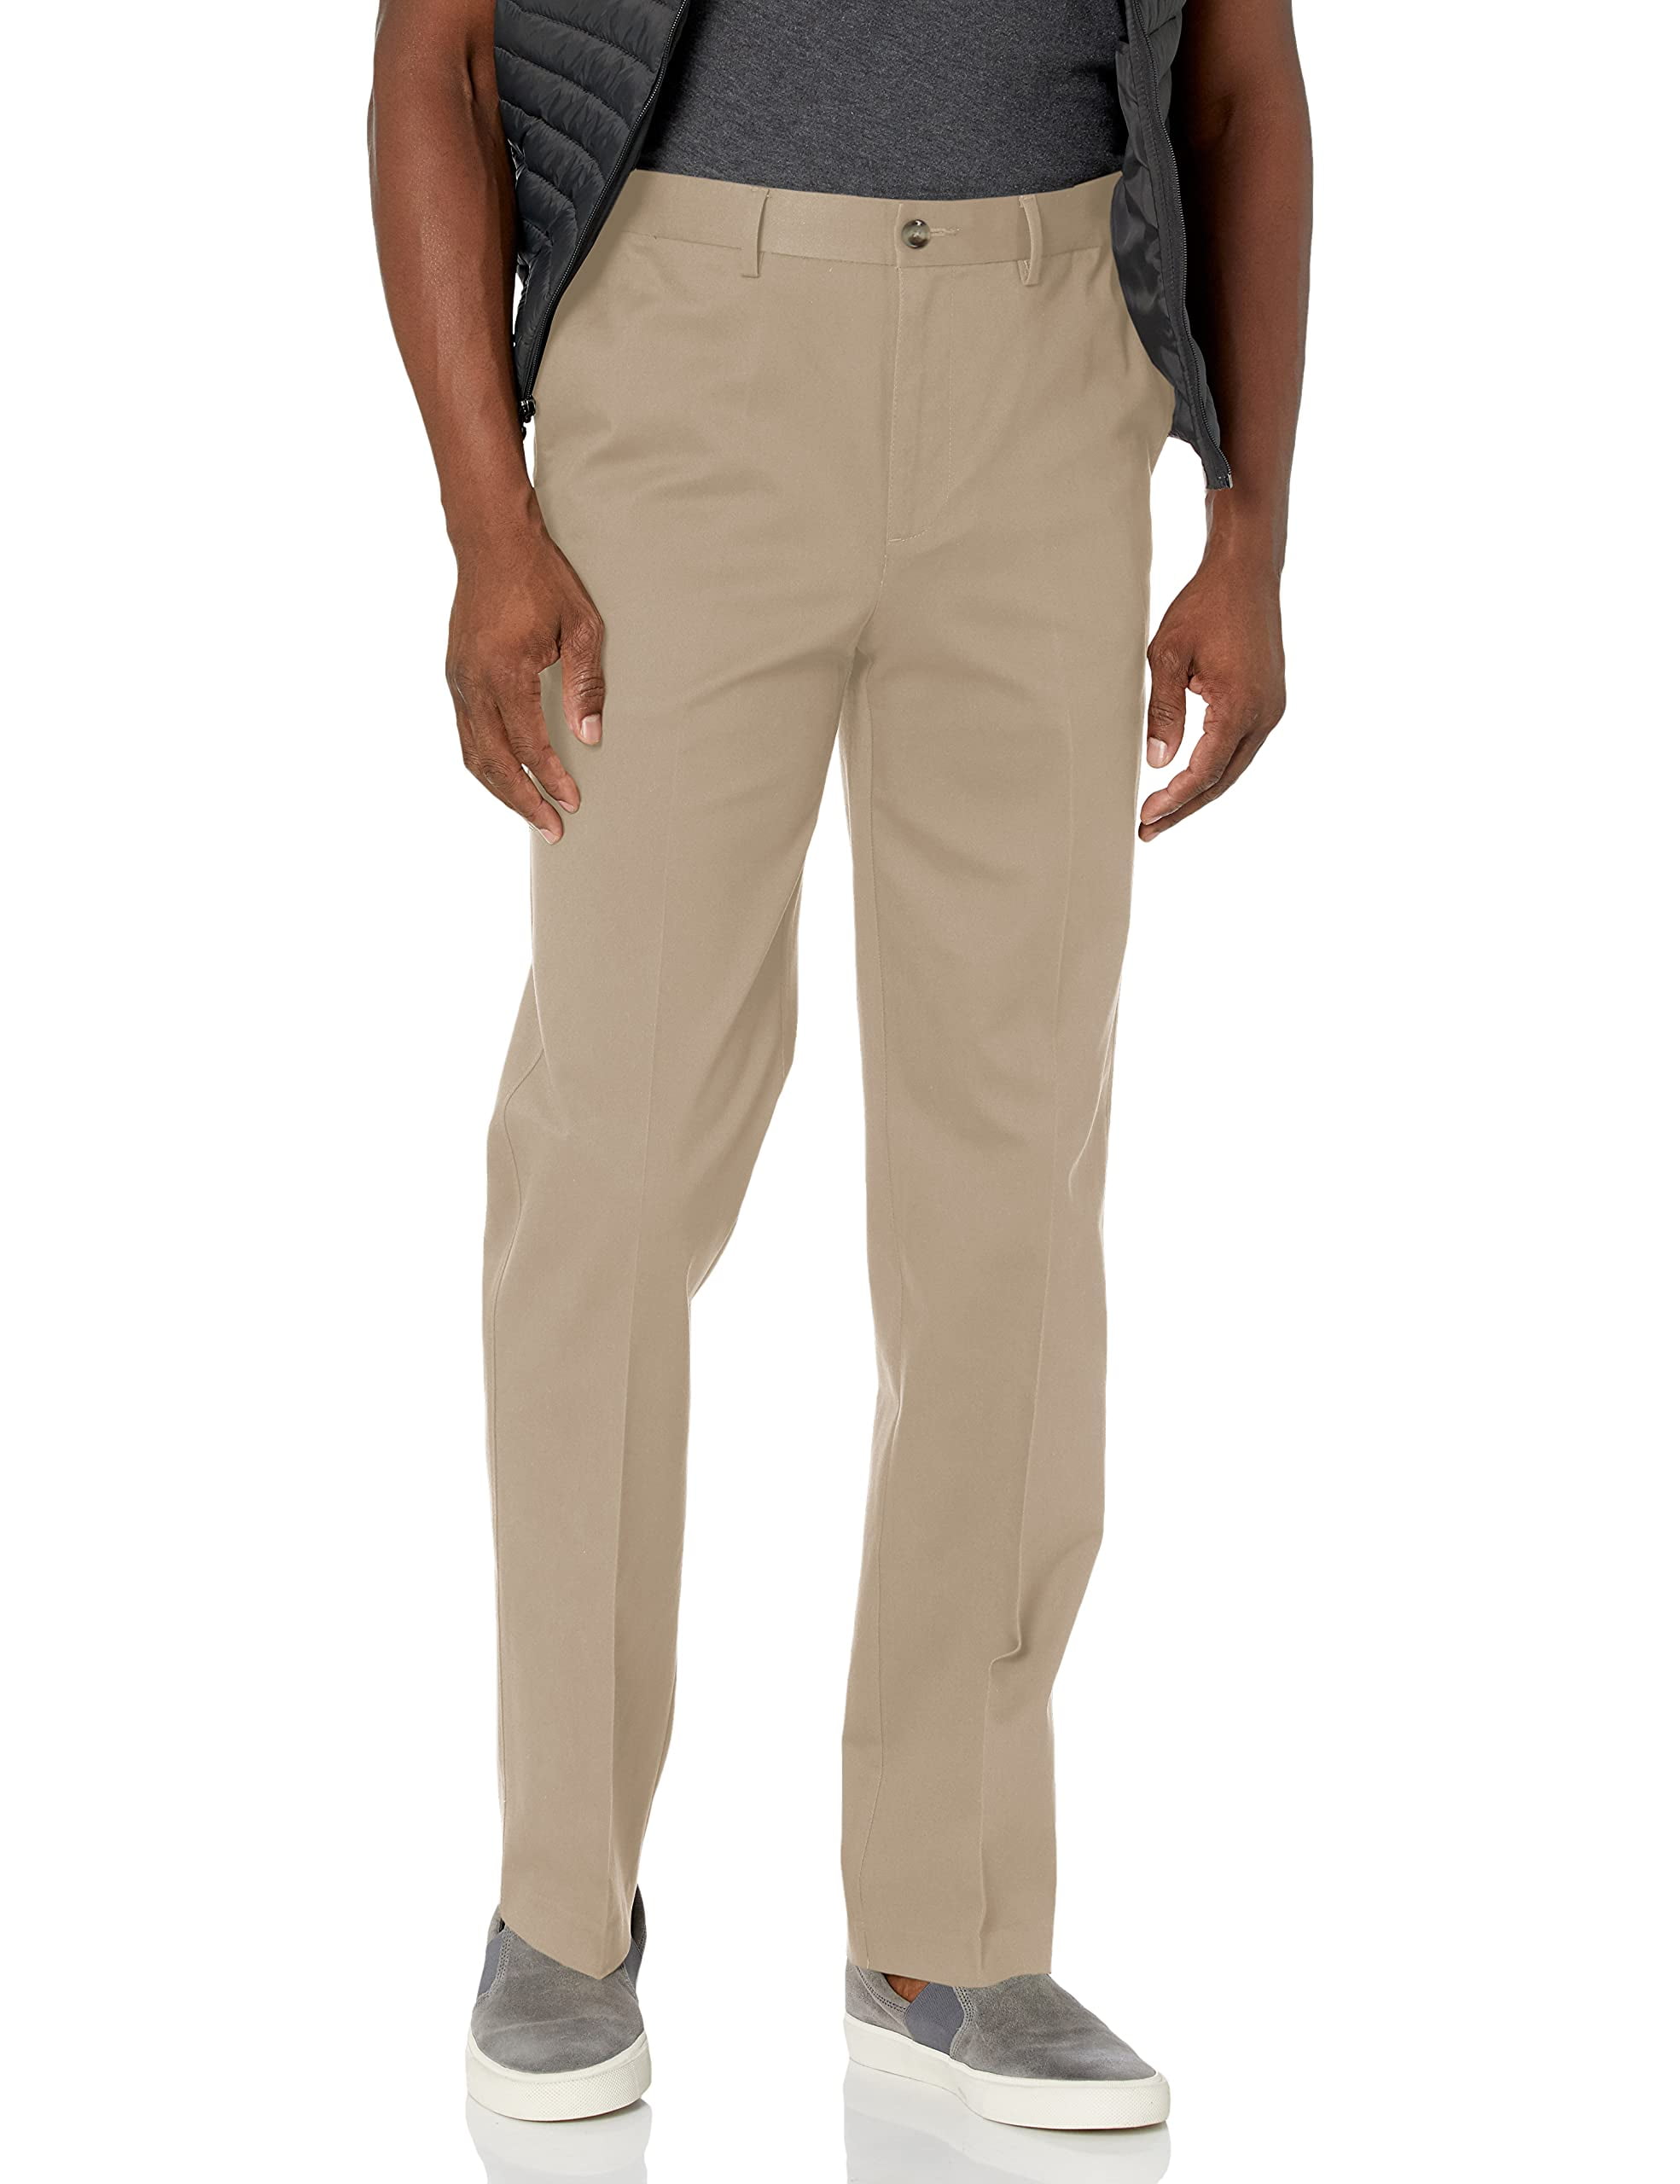 Savane Men's Flat Front Stretch Ultimate Performance Chino Pants with ...